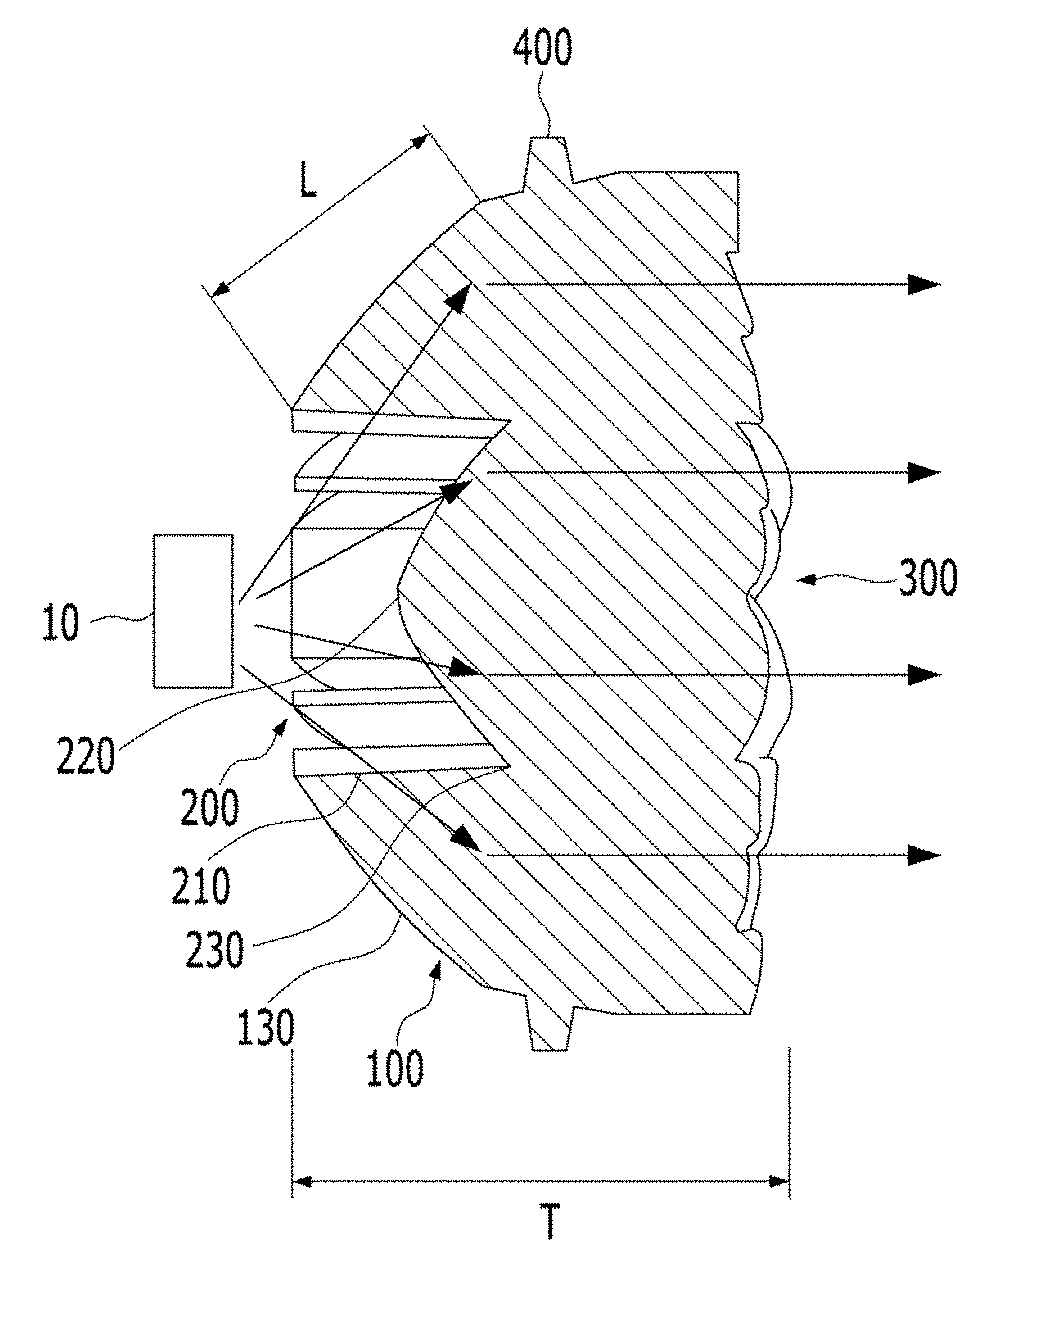 Multi-facet lens having continuous non-spherical curved portion